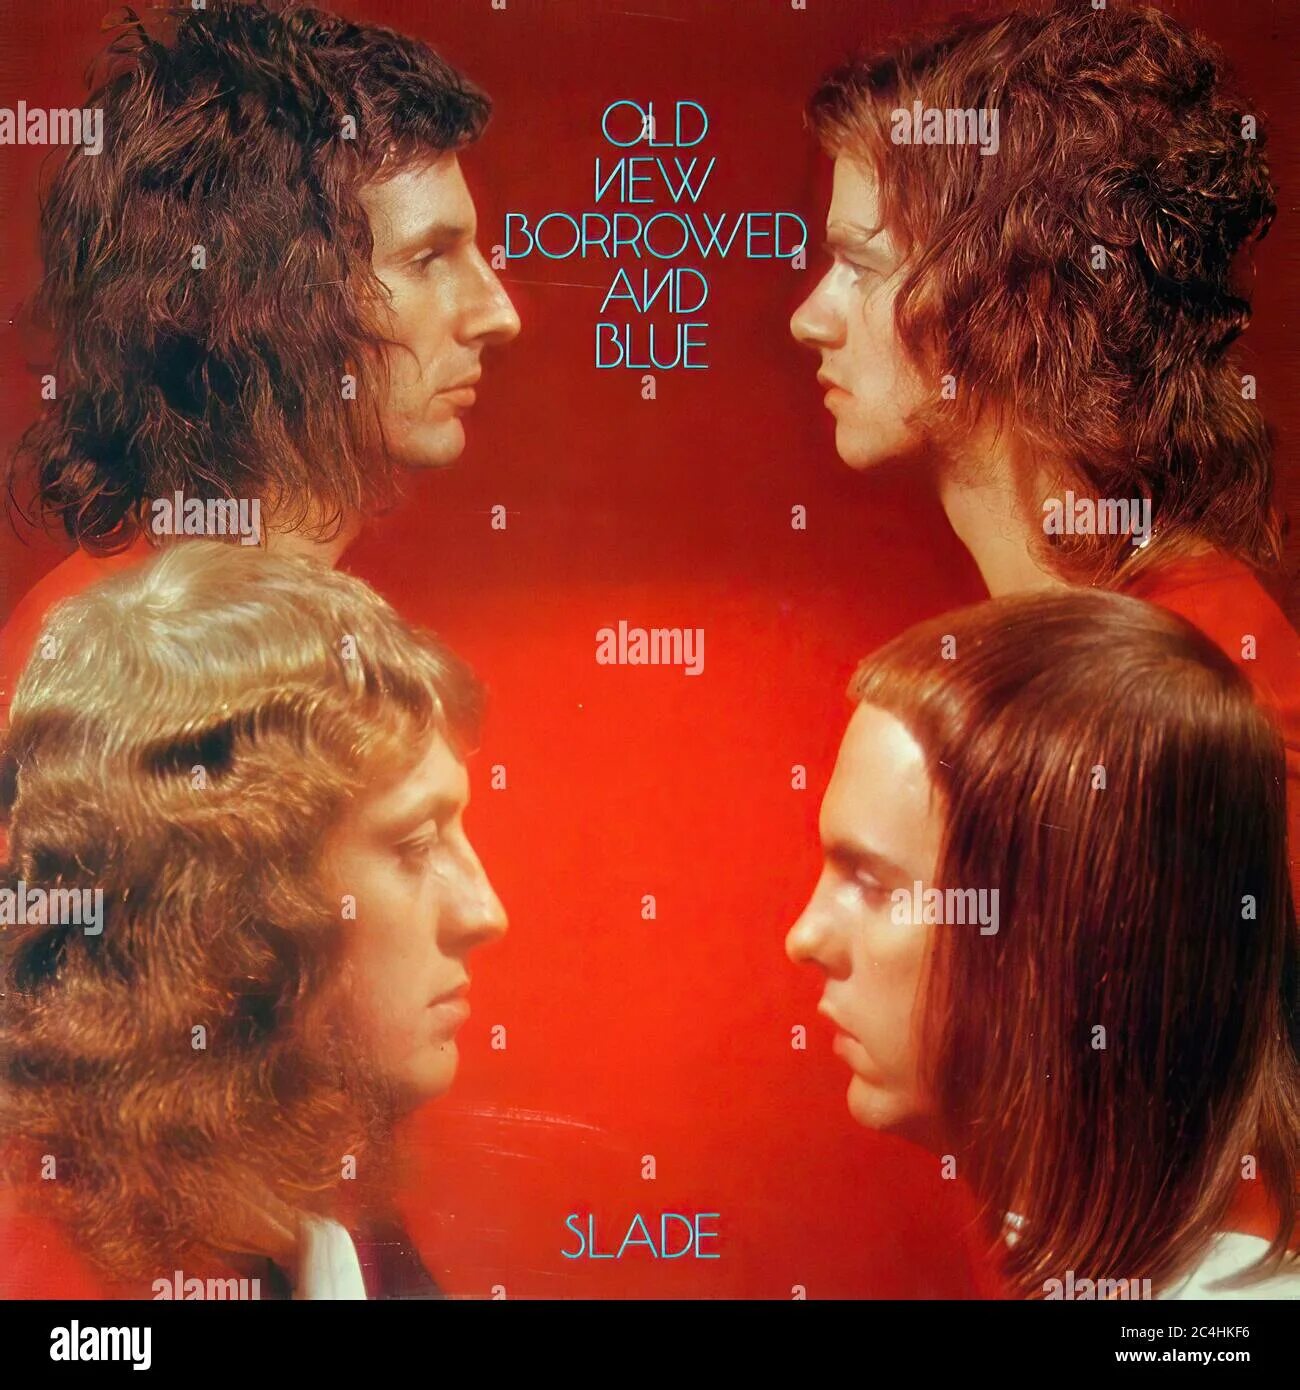 Slade old New Borrowed and Blue 1974. Slade old New Borrowed and Blue 1974 обложка. Slade альбом Borrowed. Old New Borrowed and Blue.